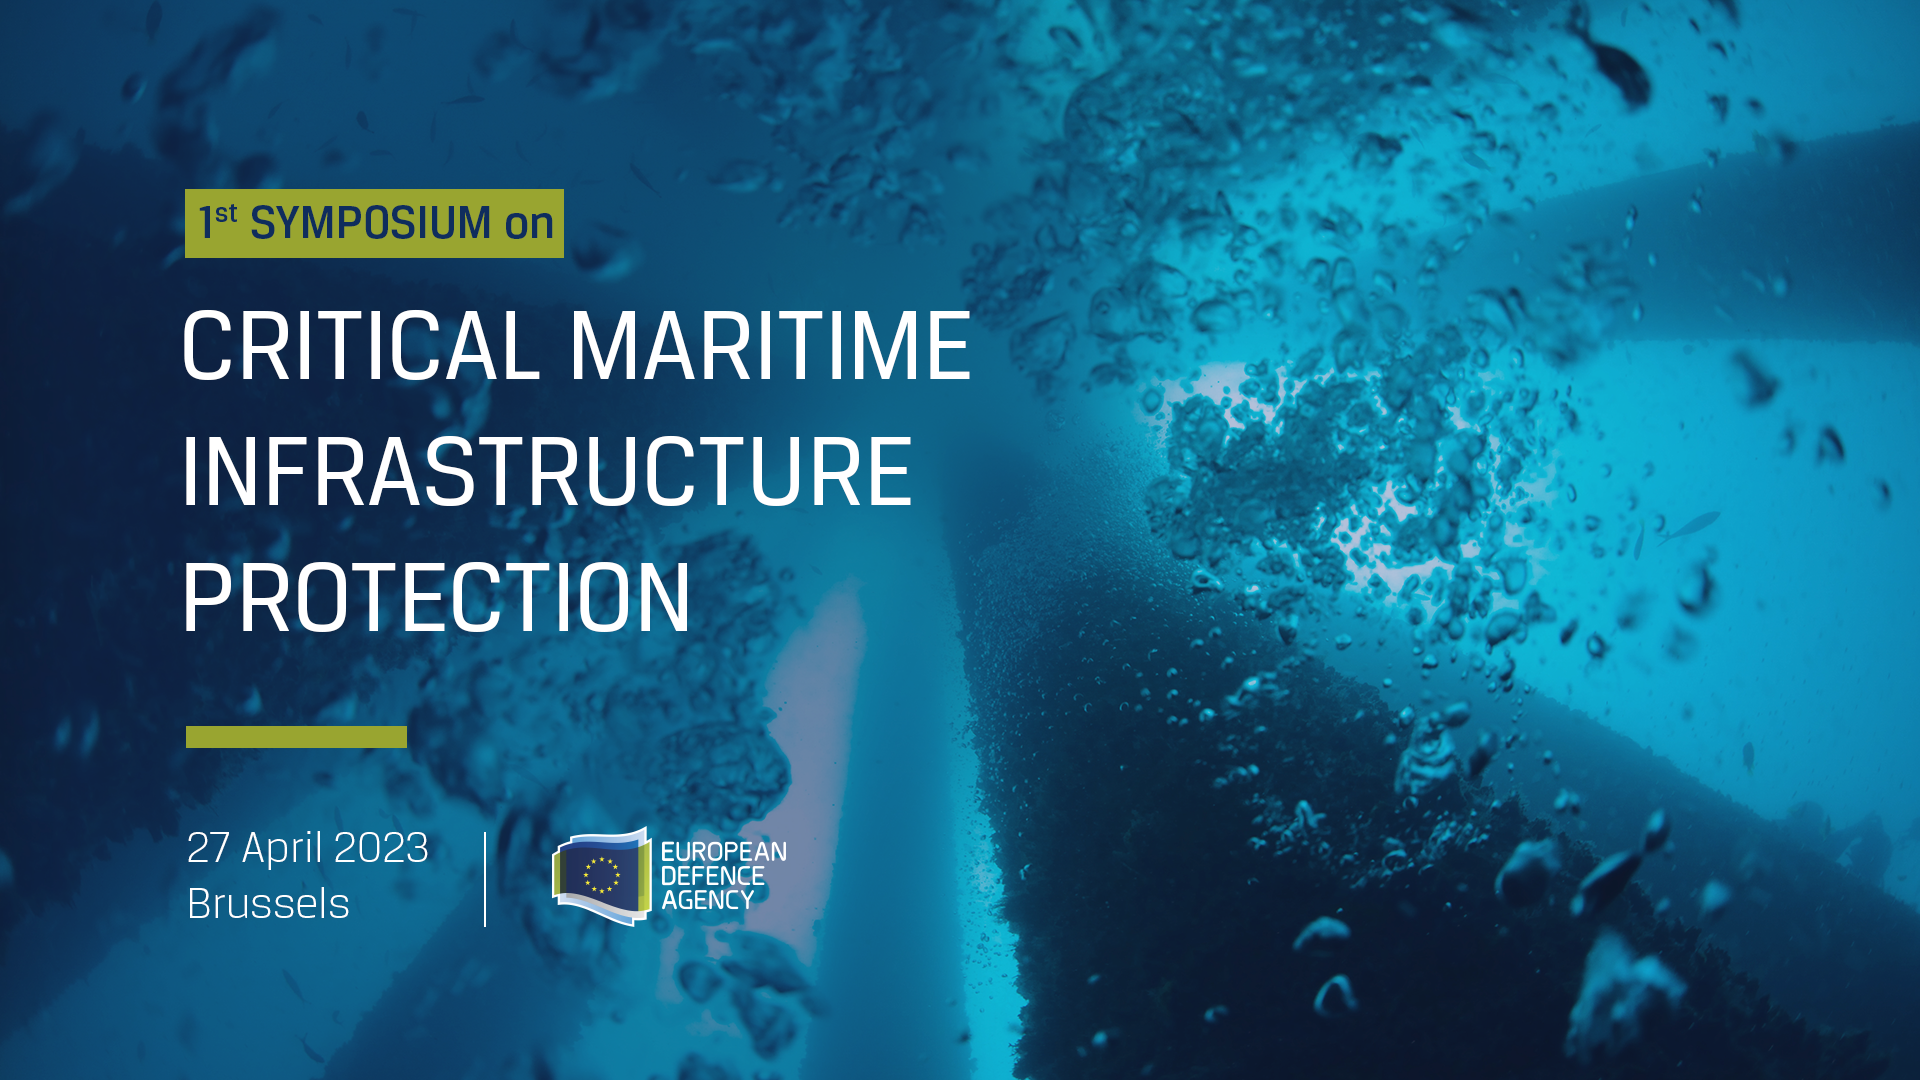 More EU cooperation needed to mitigate risks to critical maritime infrastructure